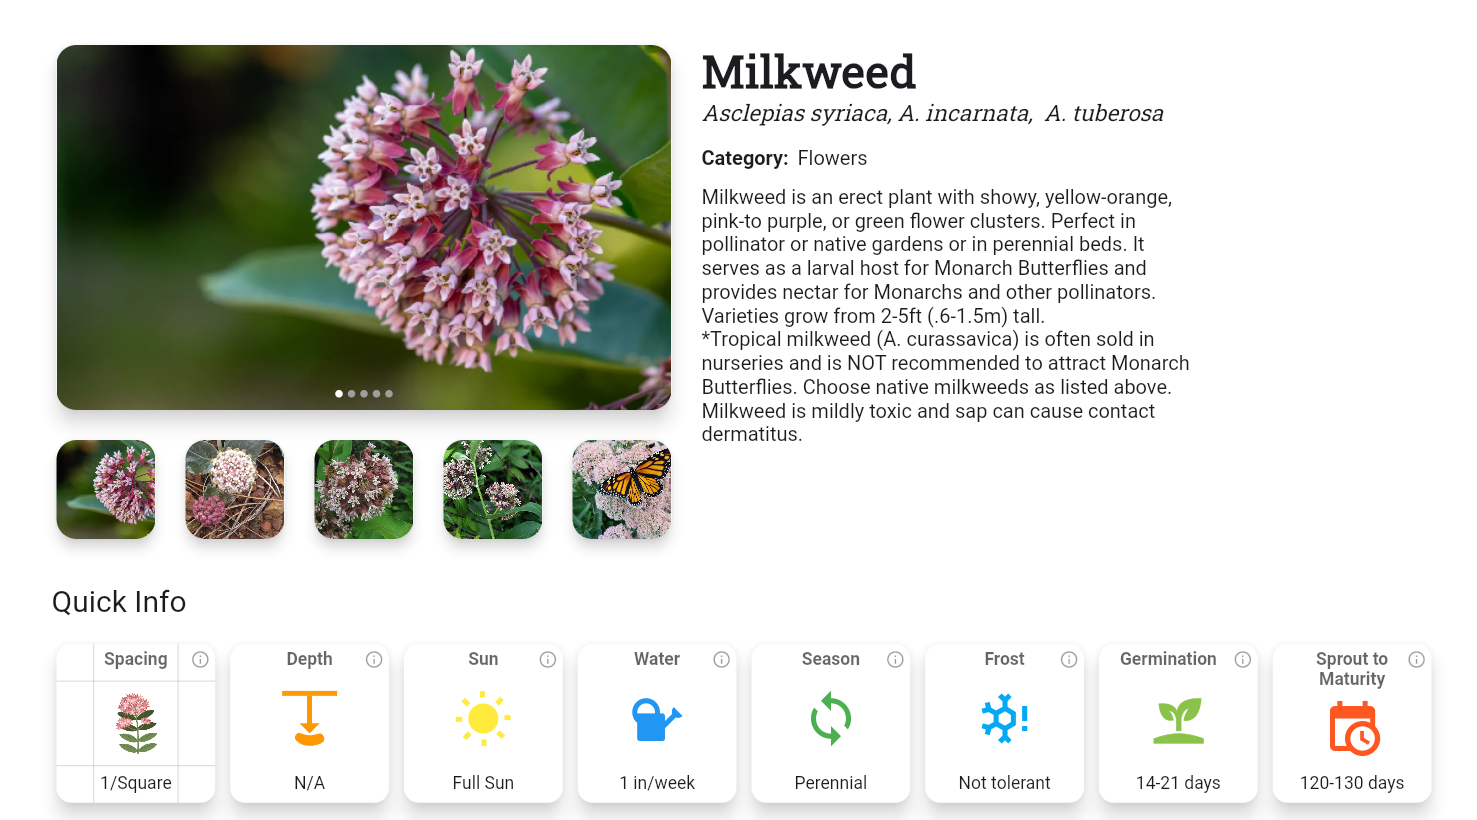 The Planter App has information on how to grow milkweed